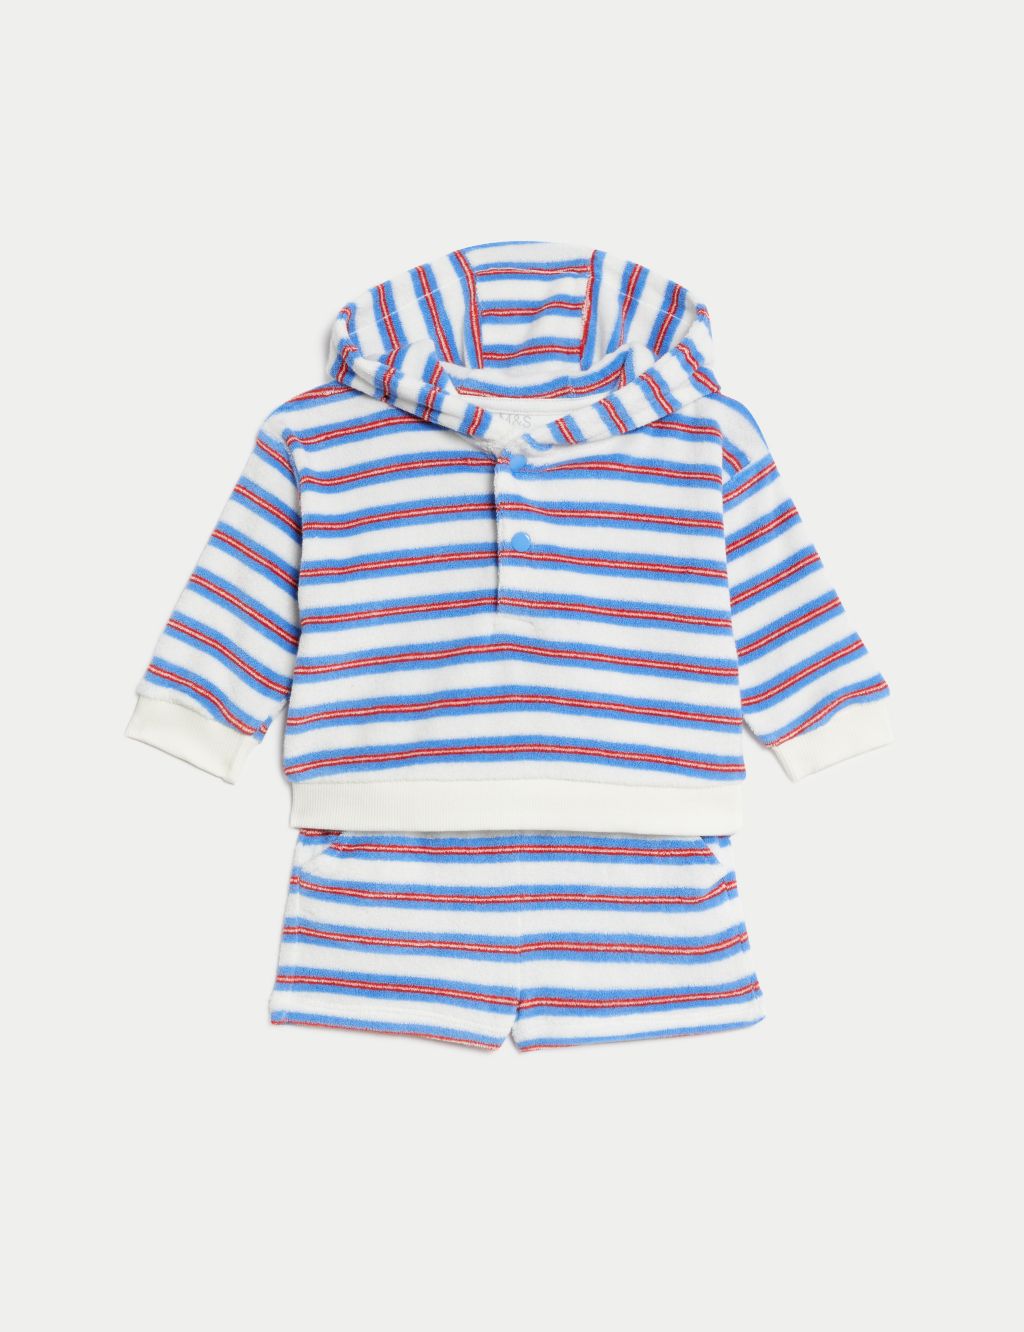 2pc Cotton Rich Striped Dungaree Outfit (0-3 Yrs)